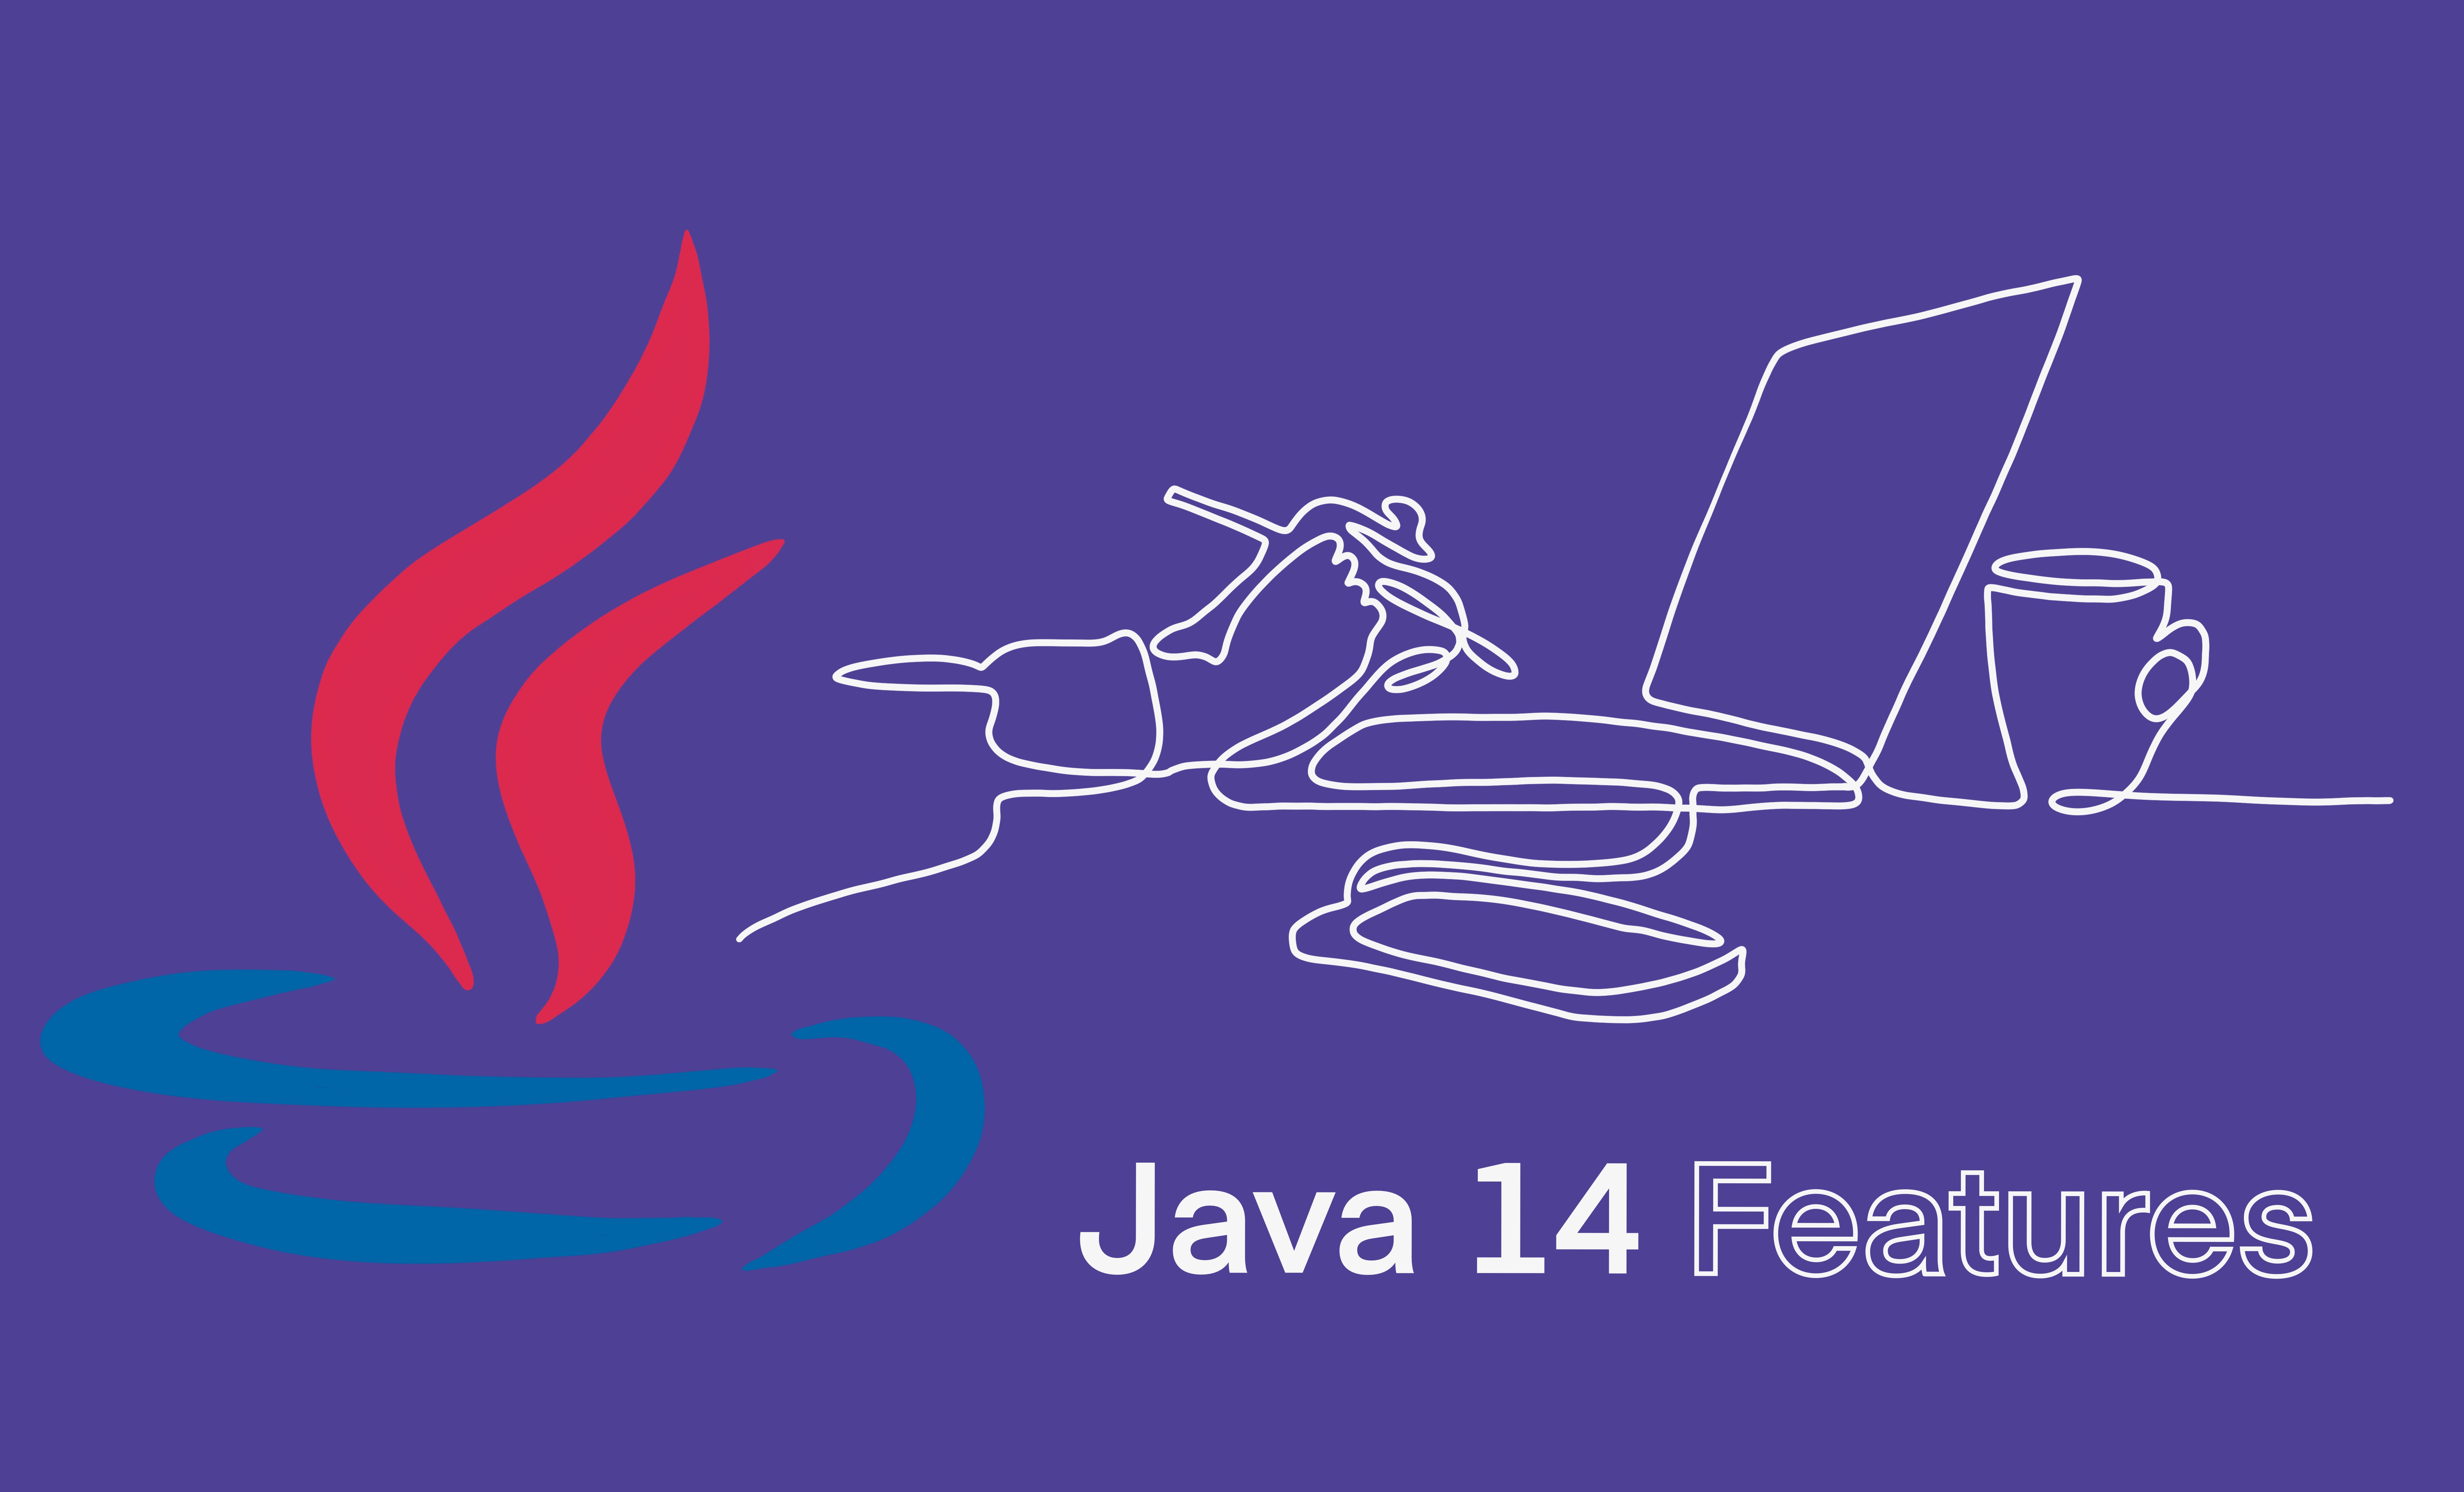 Java 14: New Features